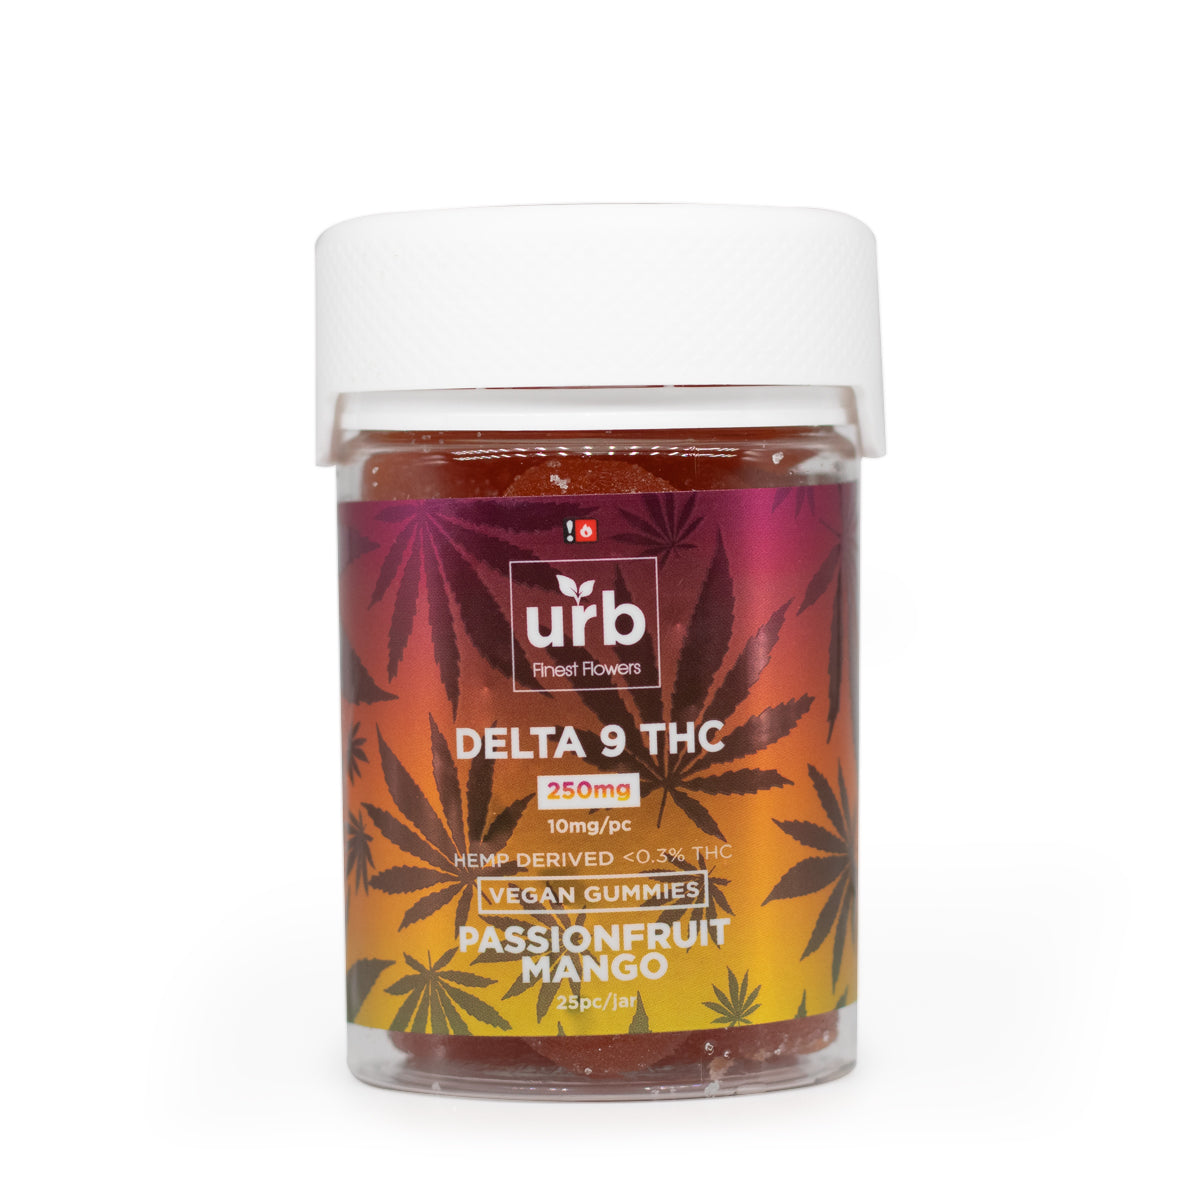 Urb Delta 9 THC Gummies 250 MG Passionfruit Mango Gummies yoga smokes yoga studio, delivery, delivery near me, yoga smokes smoke shop, find smoke shop, head shop near me, yoga studio, headshop, head shop, local smoke shop, psl, psl smoke shop, smoke shop, smokeshop, yoga, yoga studio, dispensary, local dispensary, smokeshop near me, port saint lucie, florida, port st lucie, lounge, life, highlife, love, stoned, highsociety. Yoga Smokes Passionfruit Mango